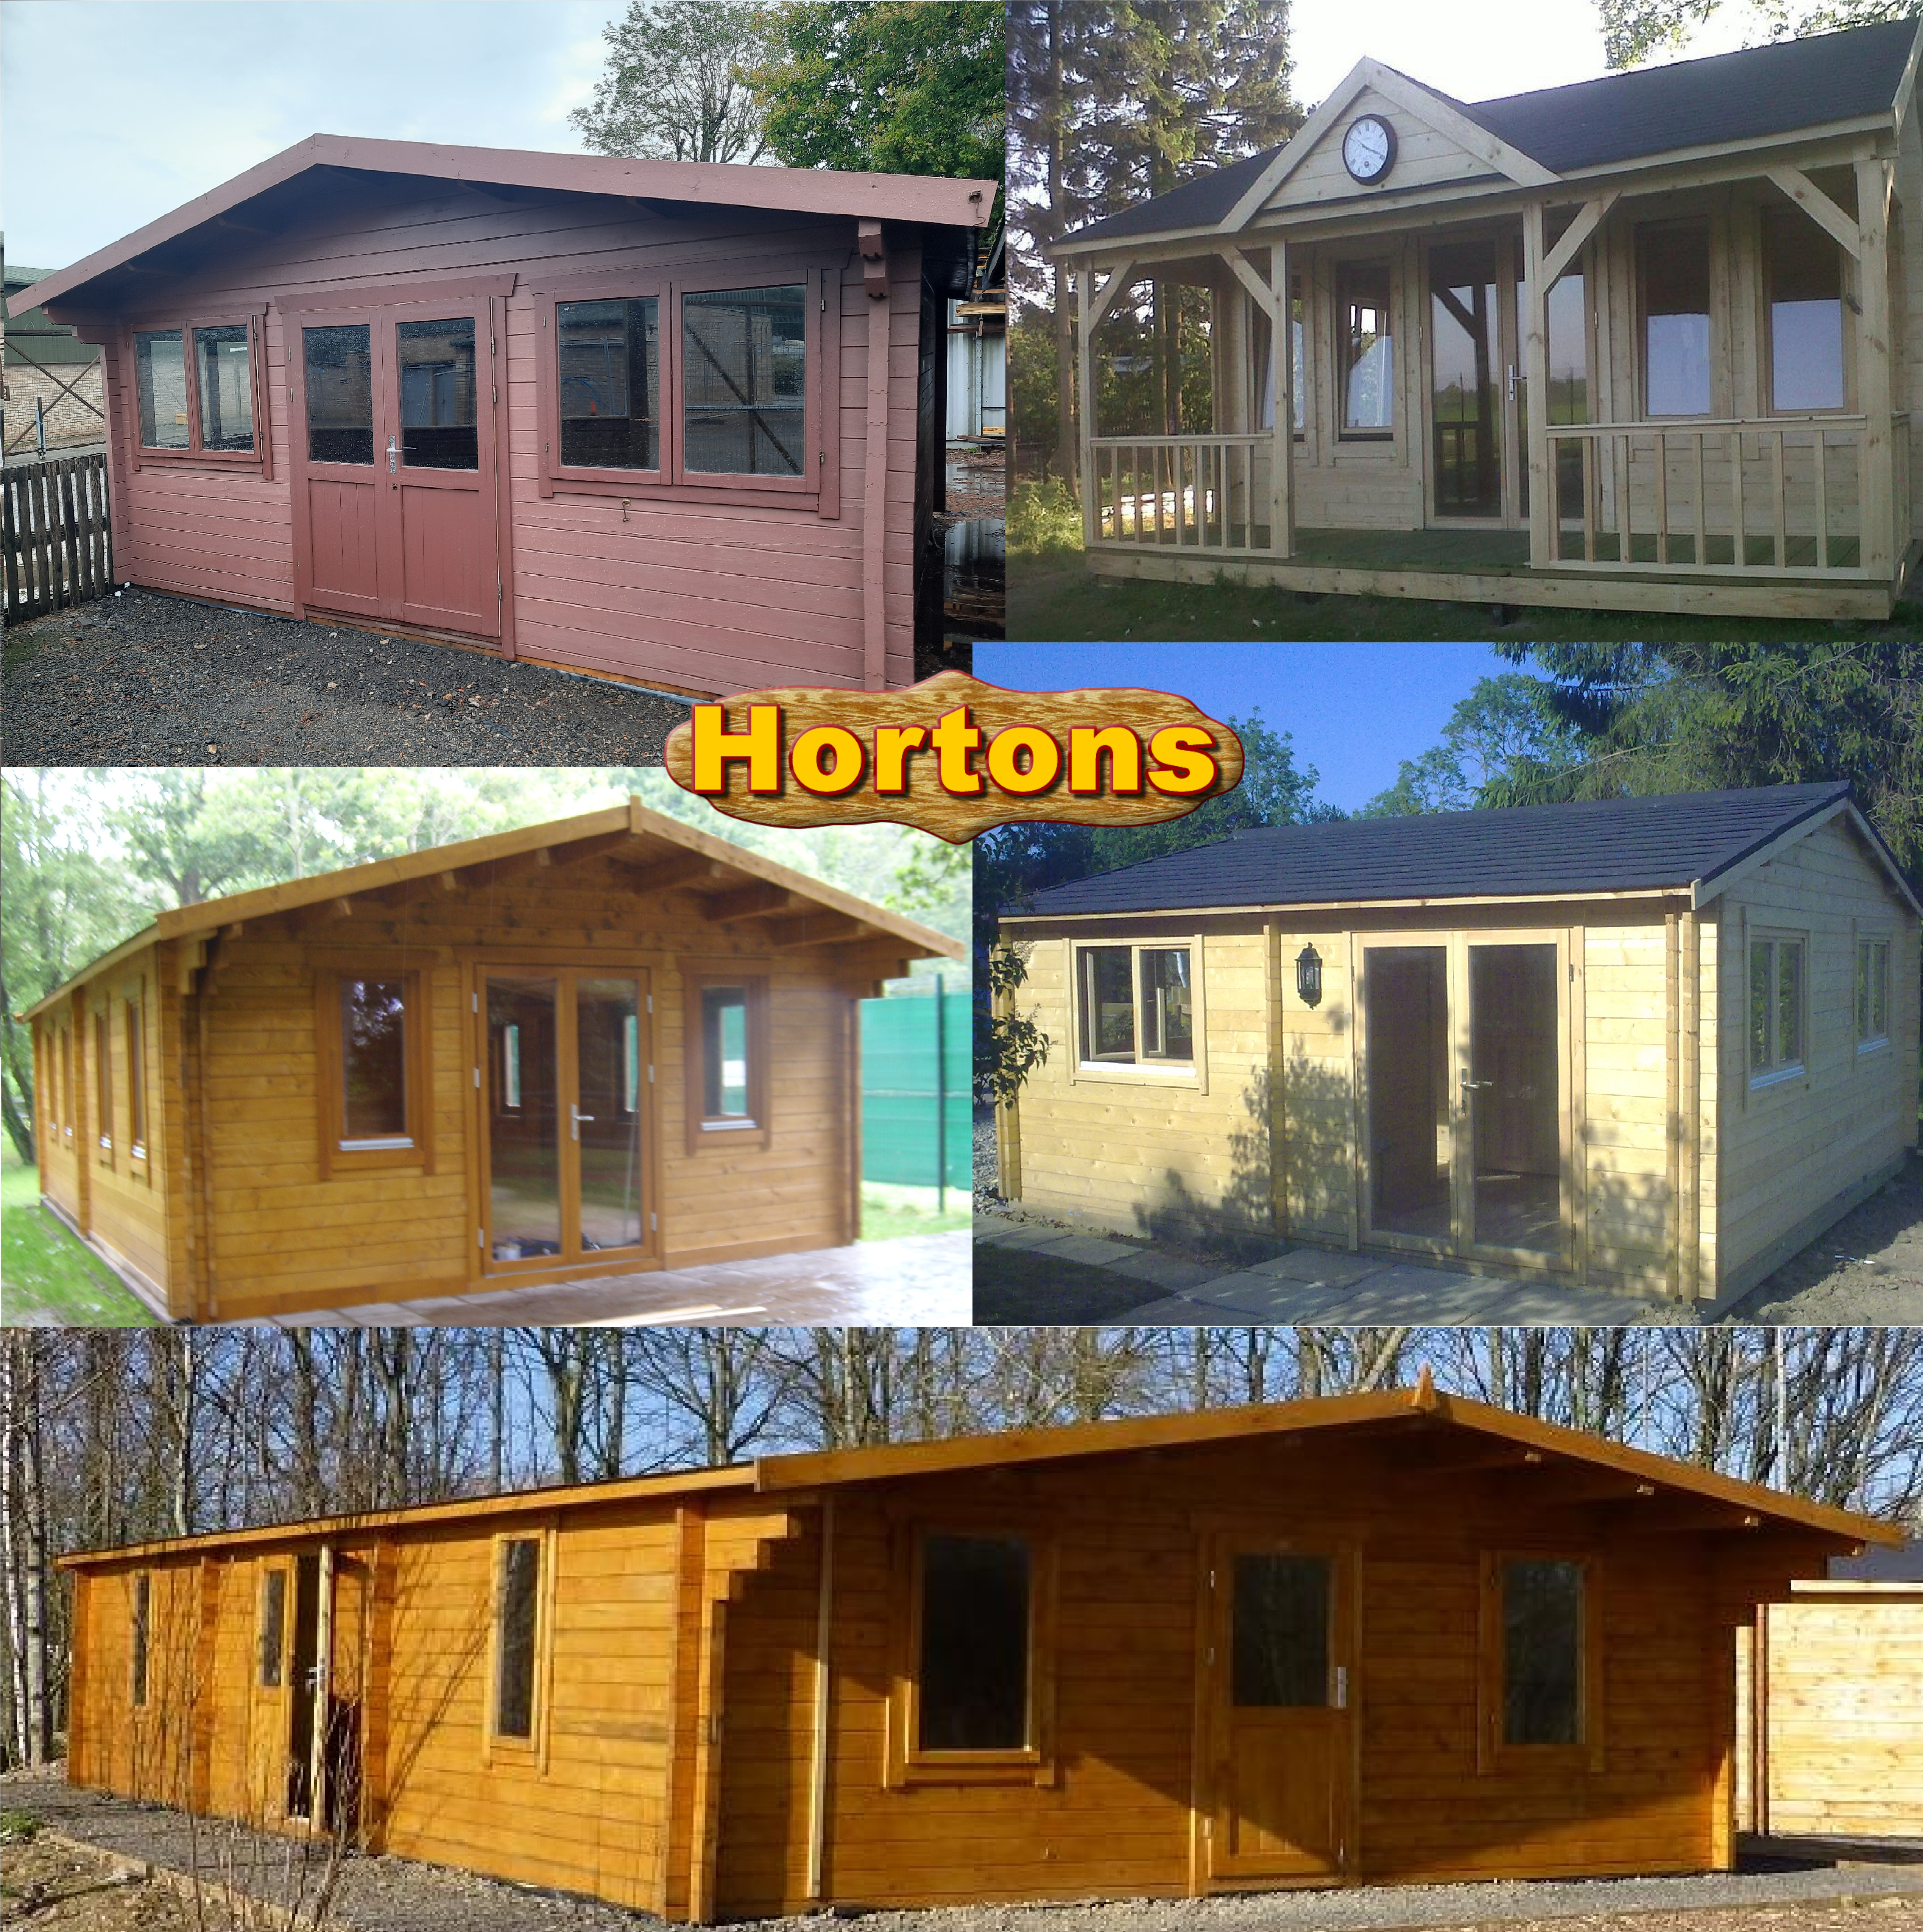 6m log cabins for sale. Supply and fit.